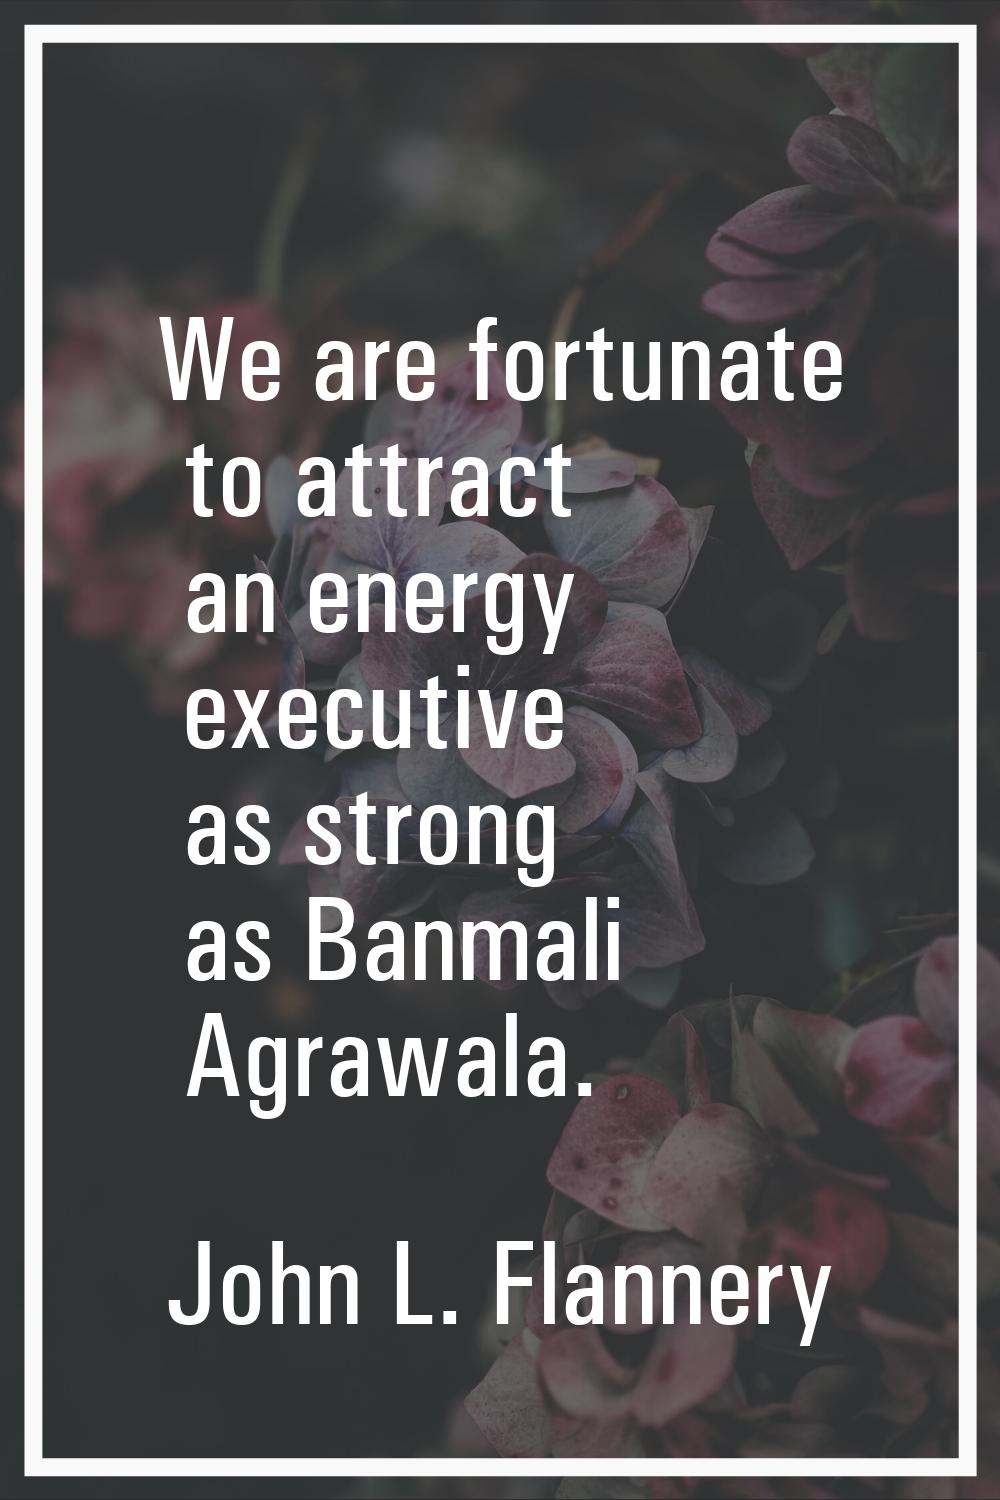 We are fortunate to attract an energy executive as strong as Banmali Agrawala.